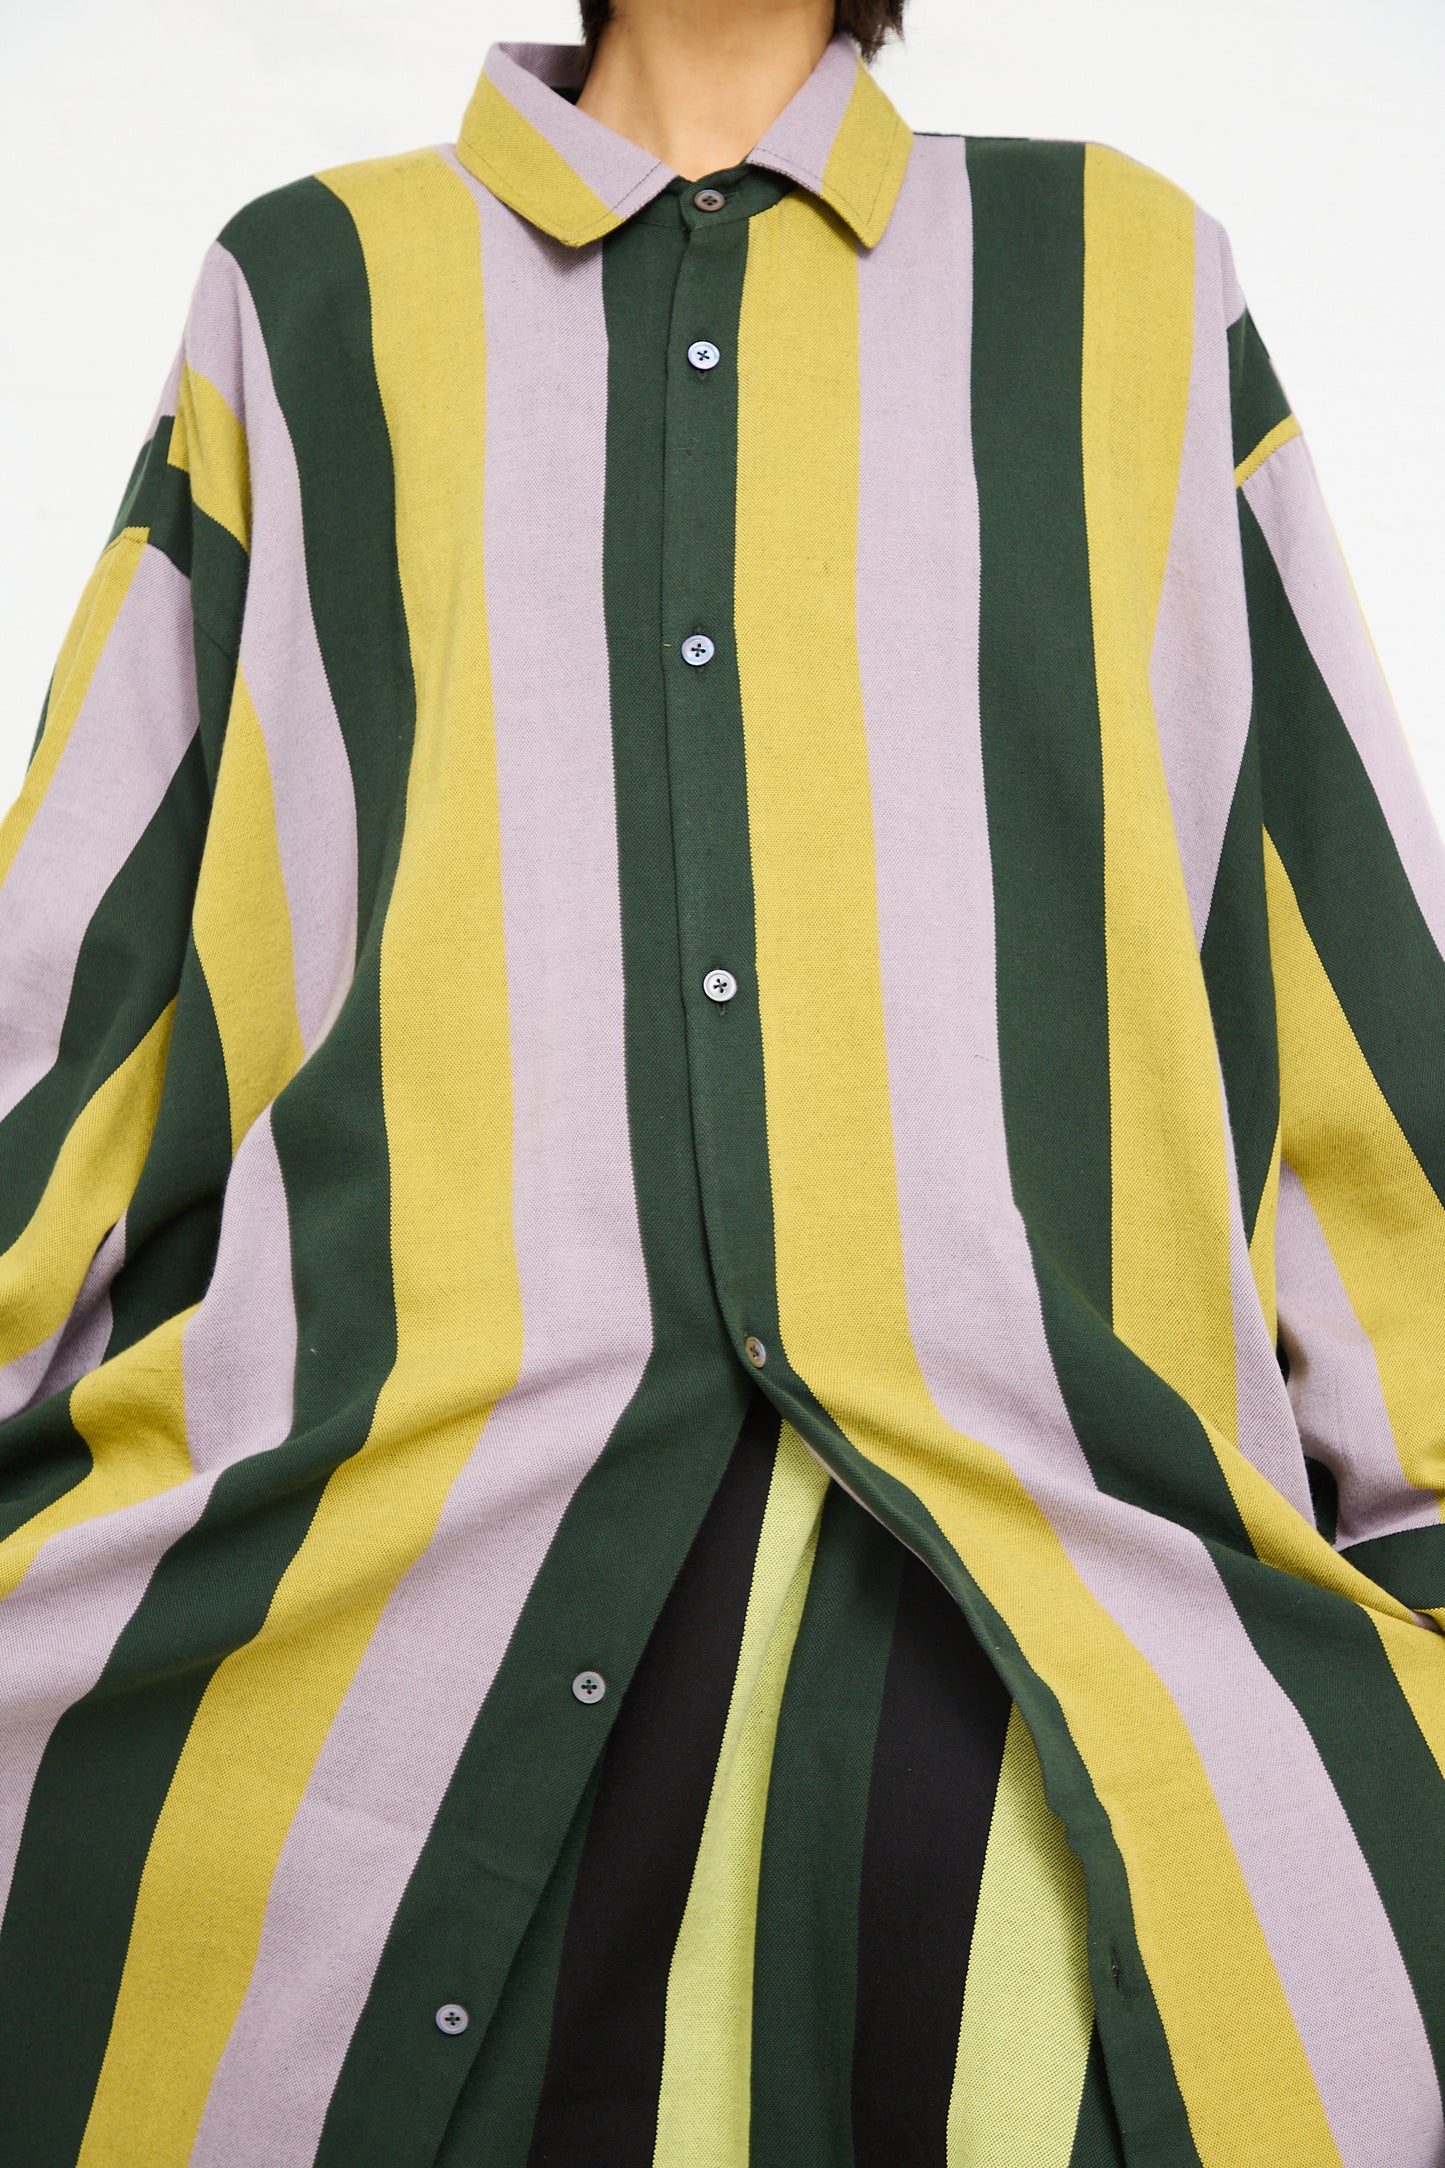 A person wearing a Marrakshi Life Small Collar Oversized Shirt in Stripe with a combination of yellow, green, and white colors, featuring a buttoned front and a collar.